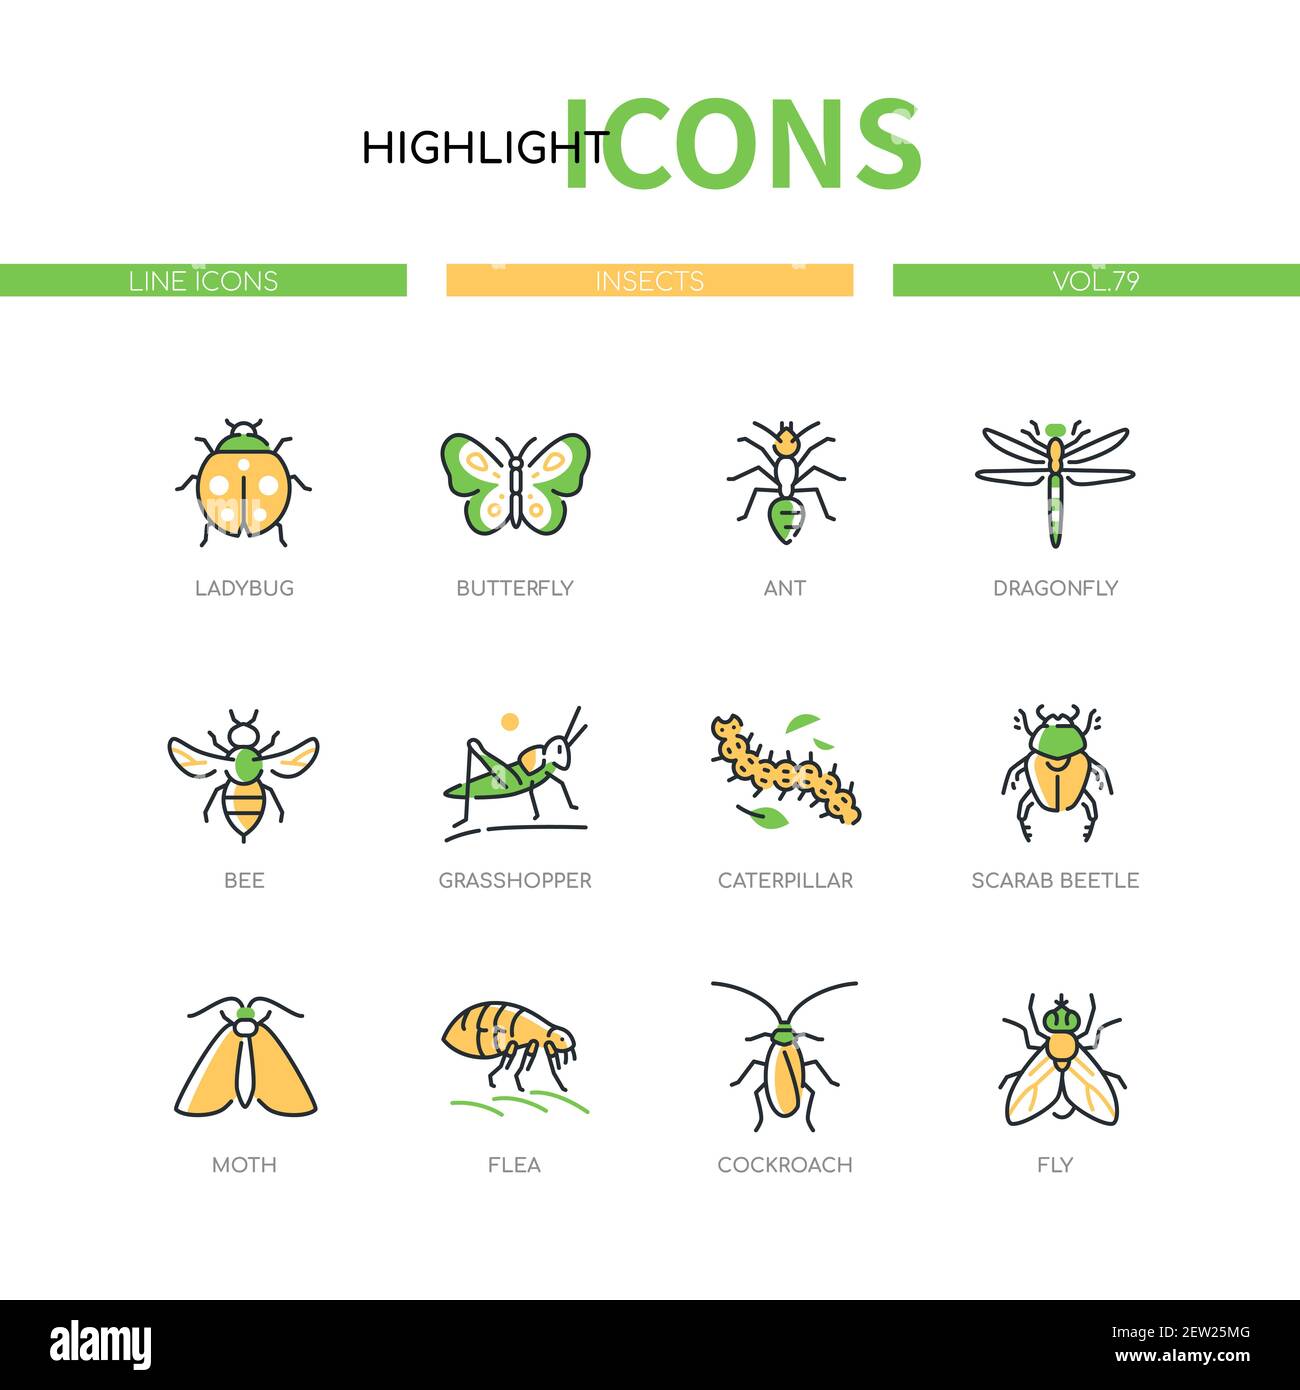 Insects collection - modern line design style icons set on white background. Images of ladybug, butterfly, ant, dragonfly, bee, grasshopper, caterpill Stock Vector